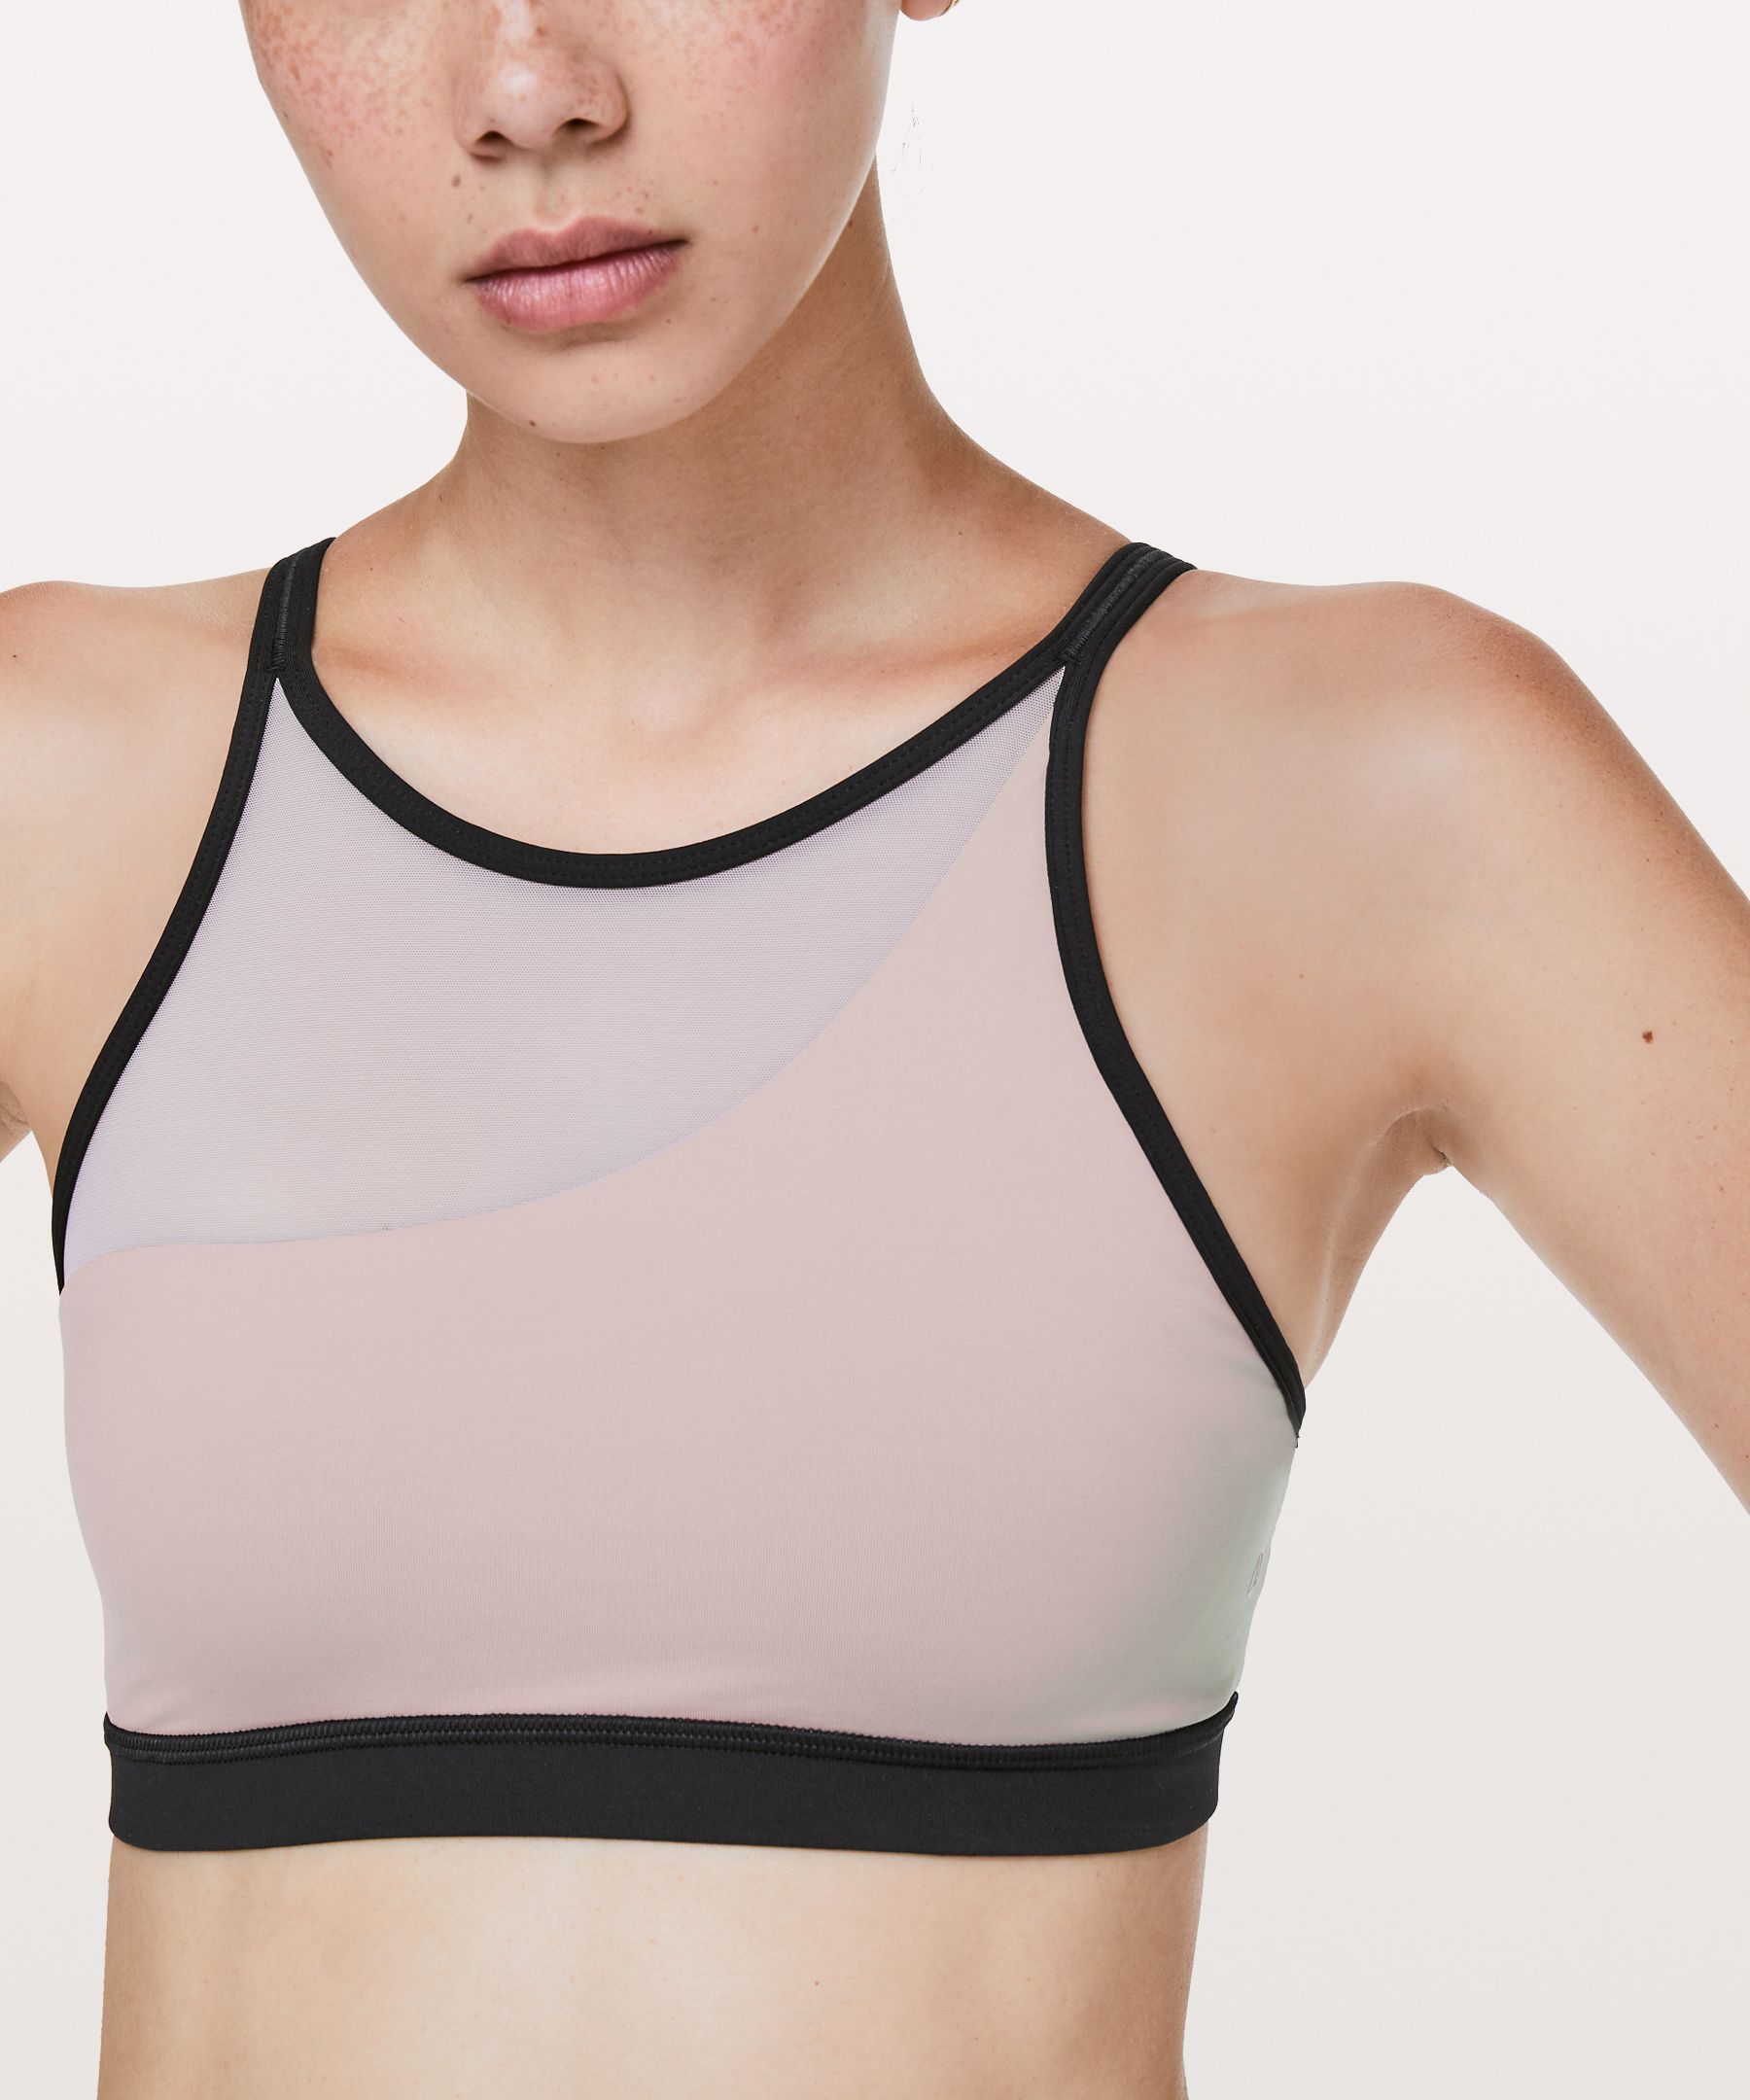 lululemon - This asymmetrical bra with a high neckline will have the whole  studio talking–meet the Forget The Rest Bra